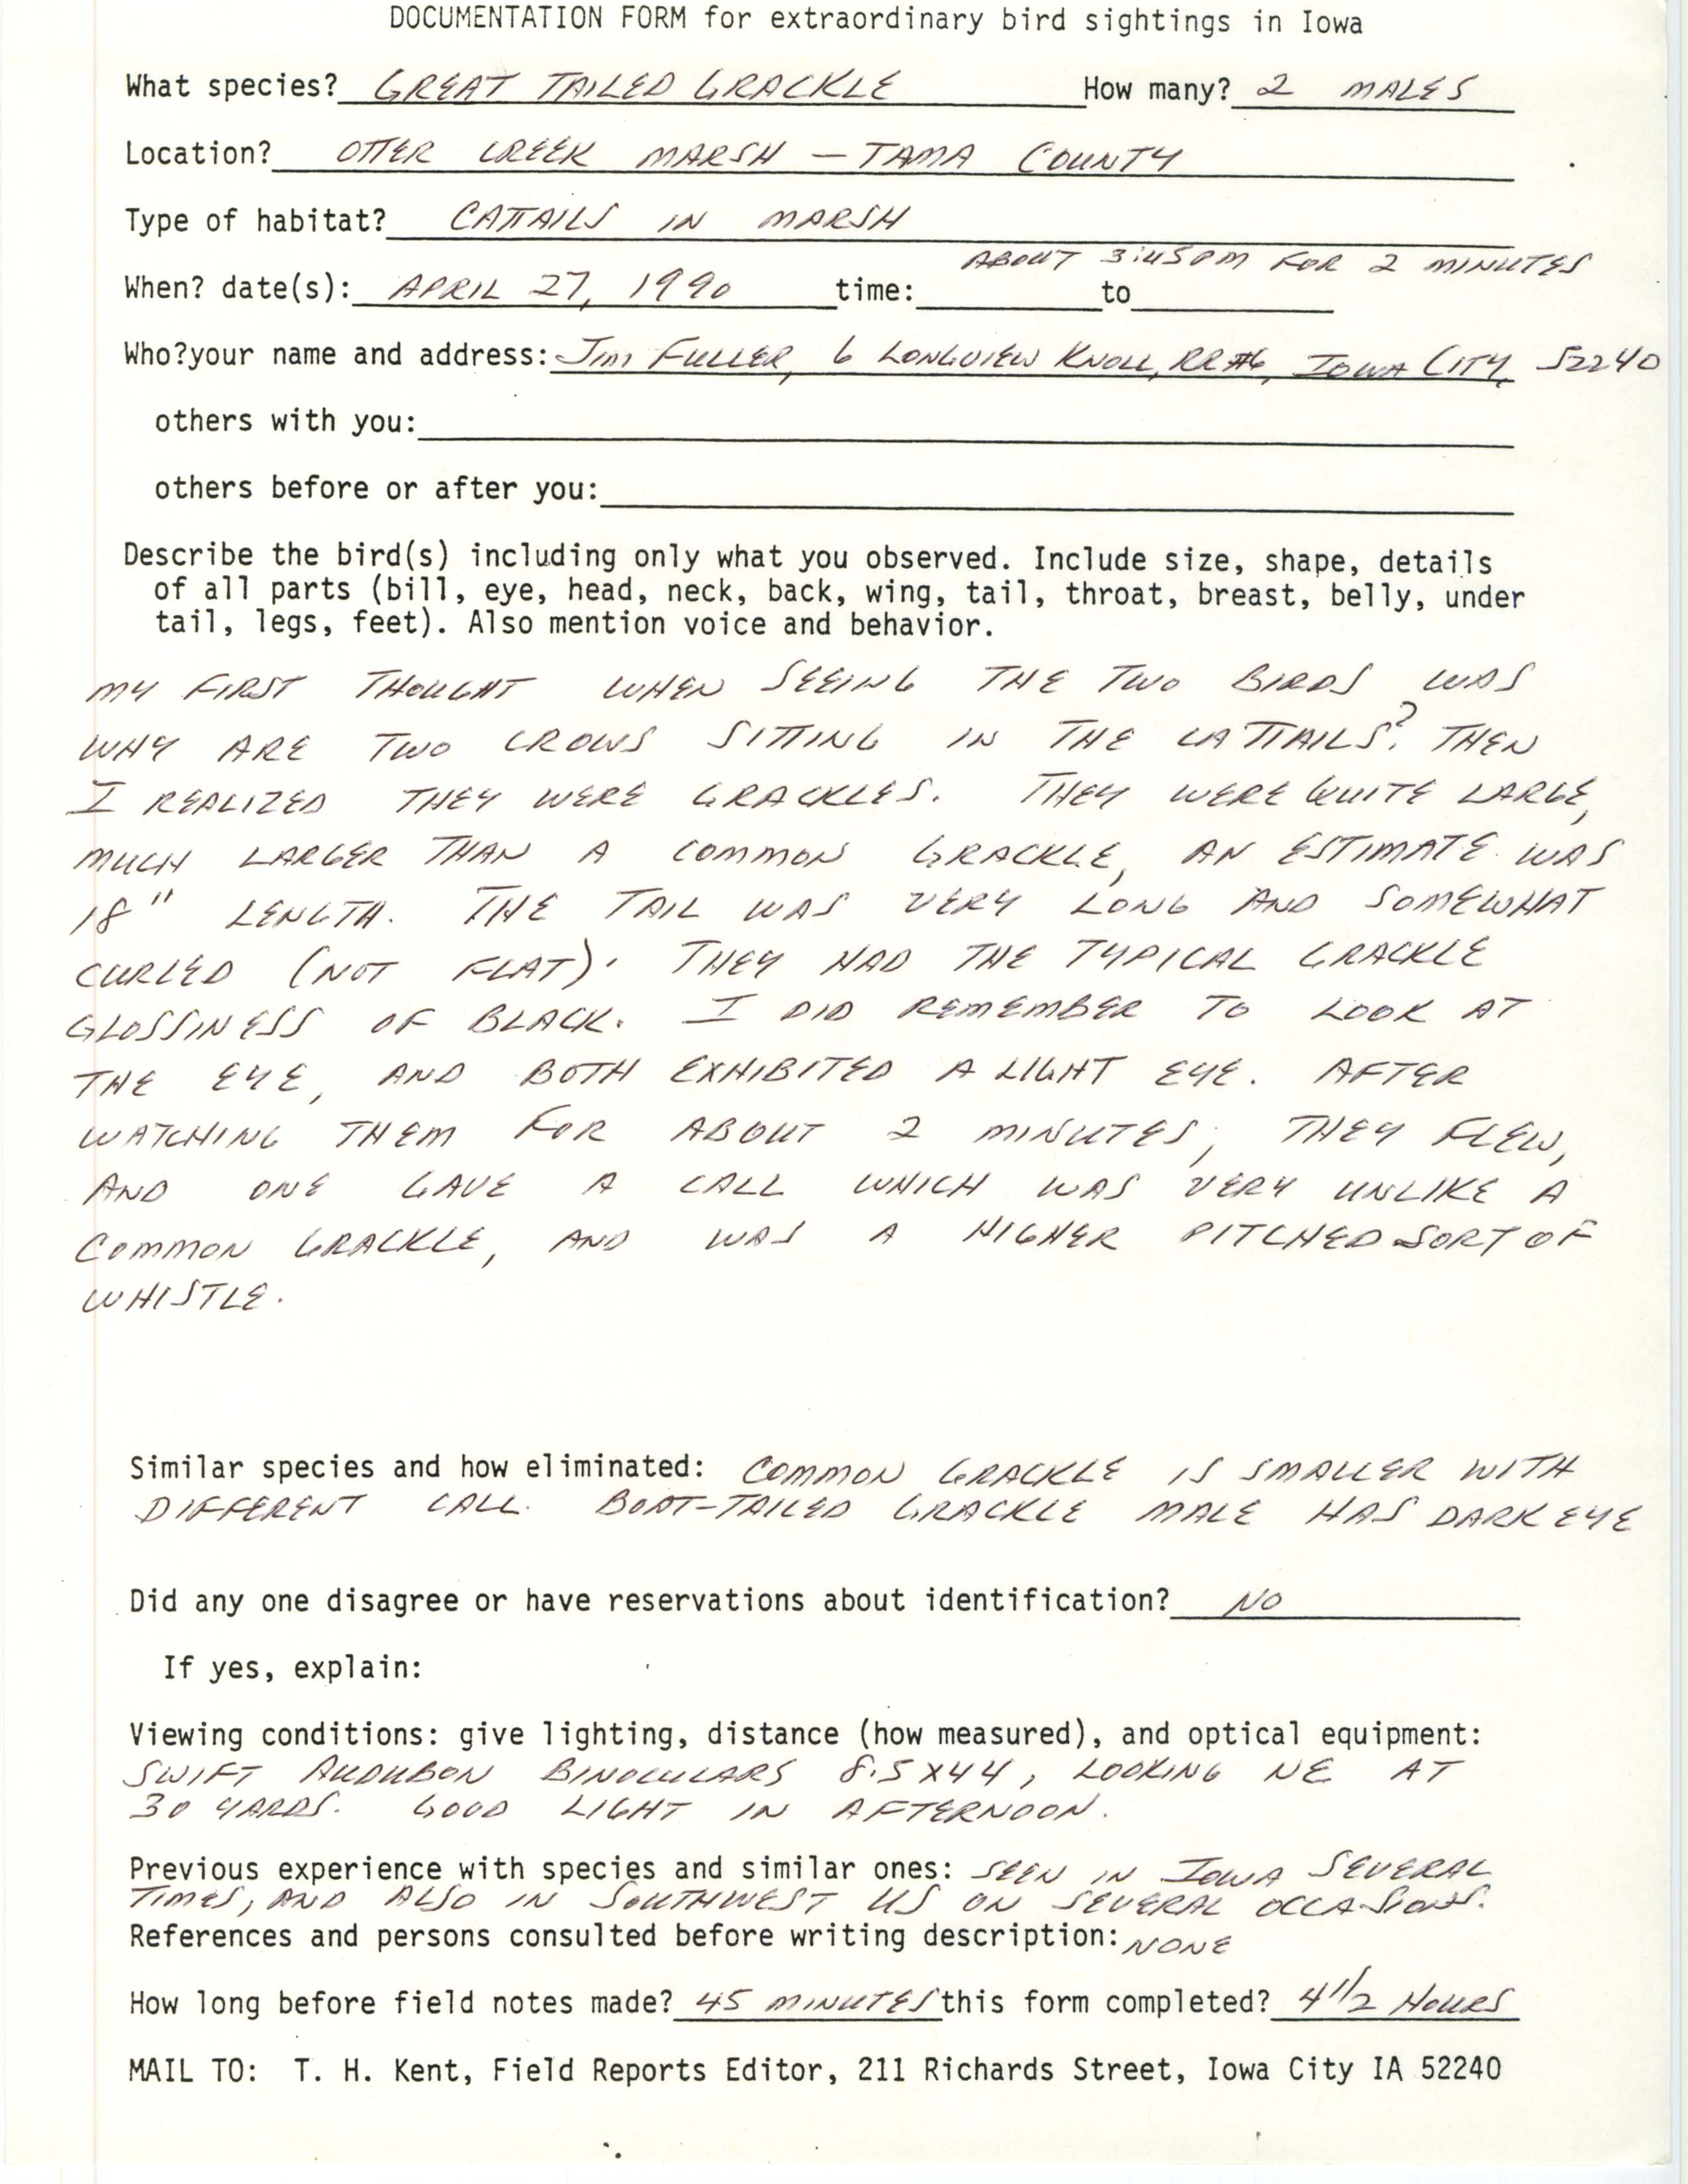 Rare bird documentation form for Great-tailed Grackle at Otter Creek Marsh, 1990